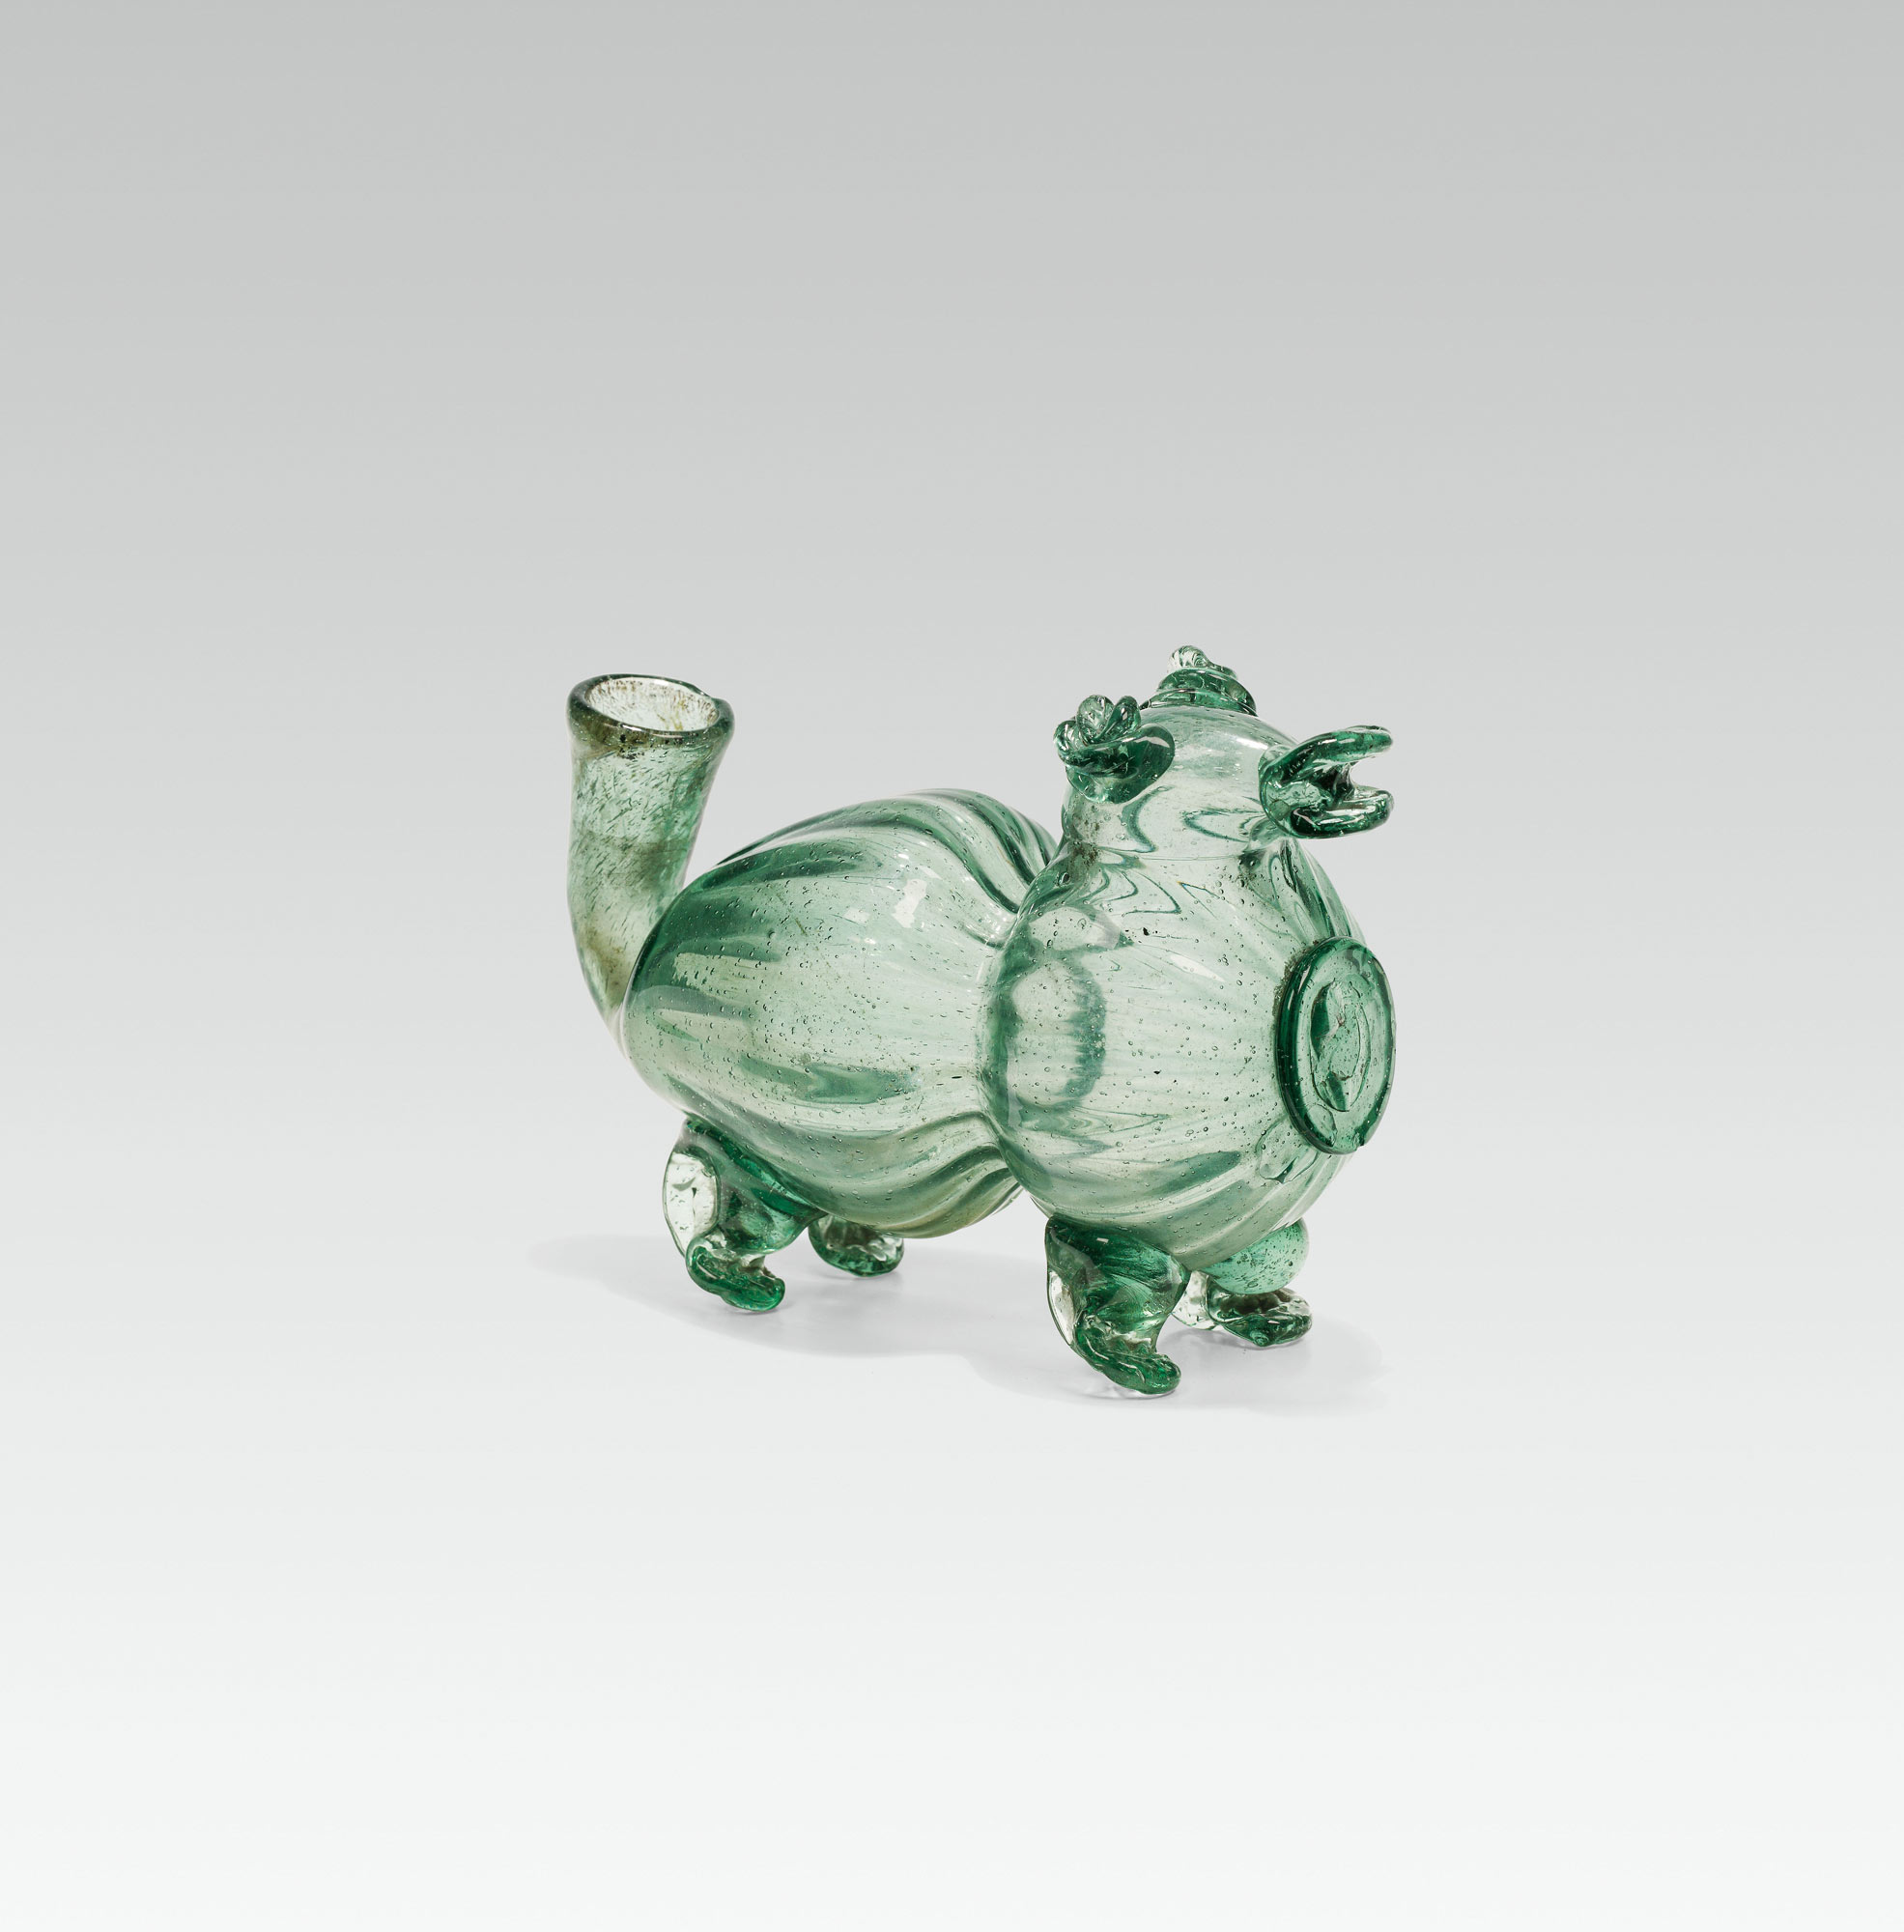 Schnapps dog "Schnapshund"green glass; pontil mark on the chest; body with structured parallel